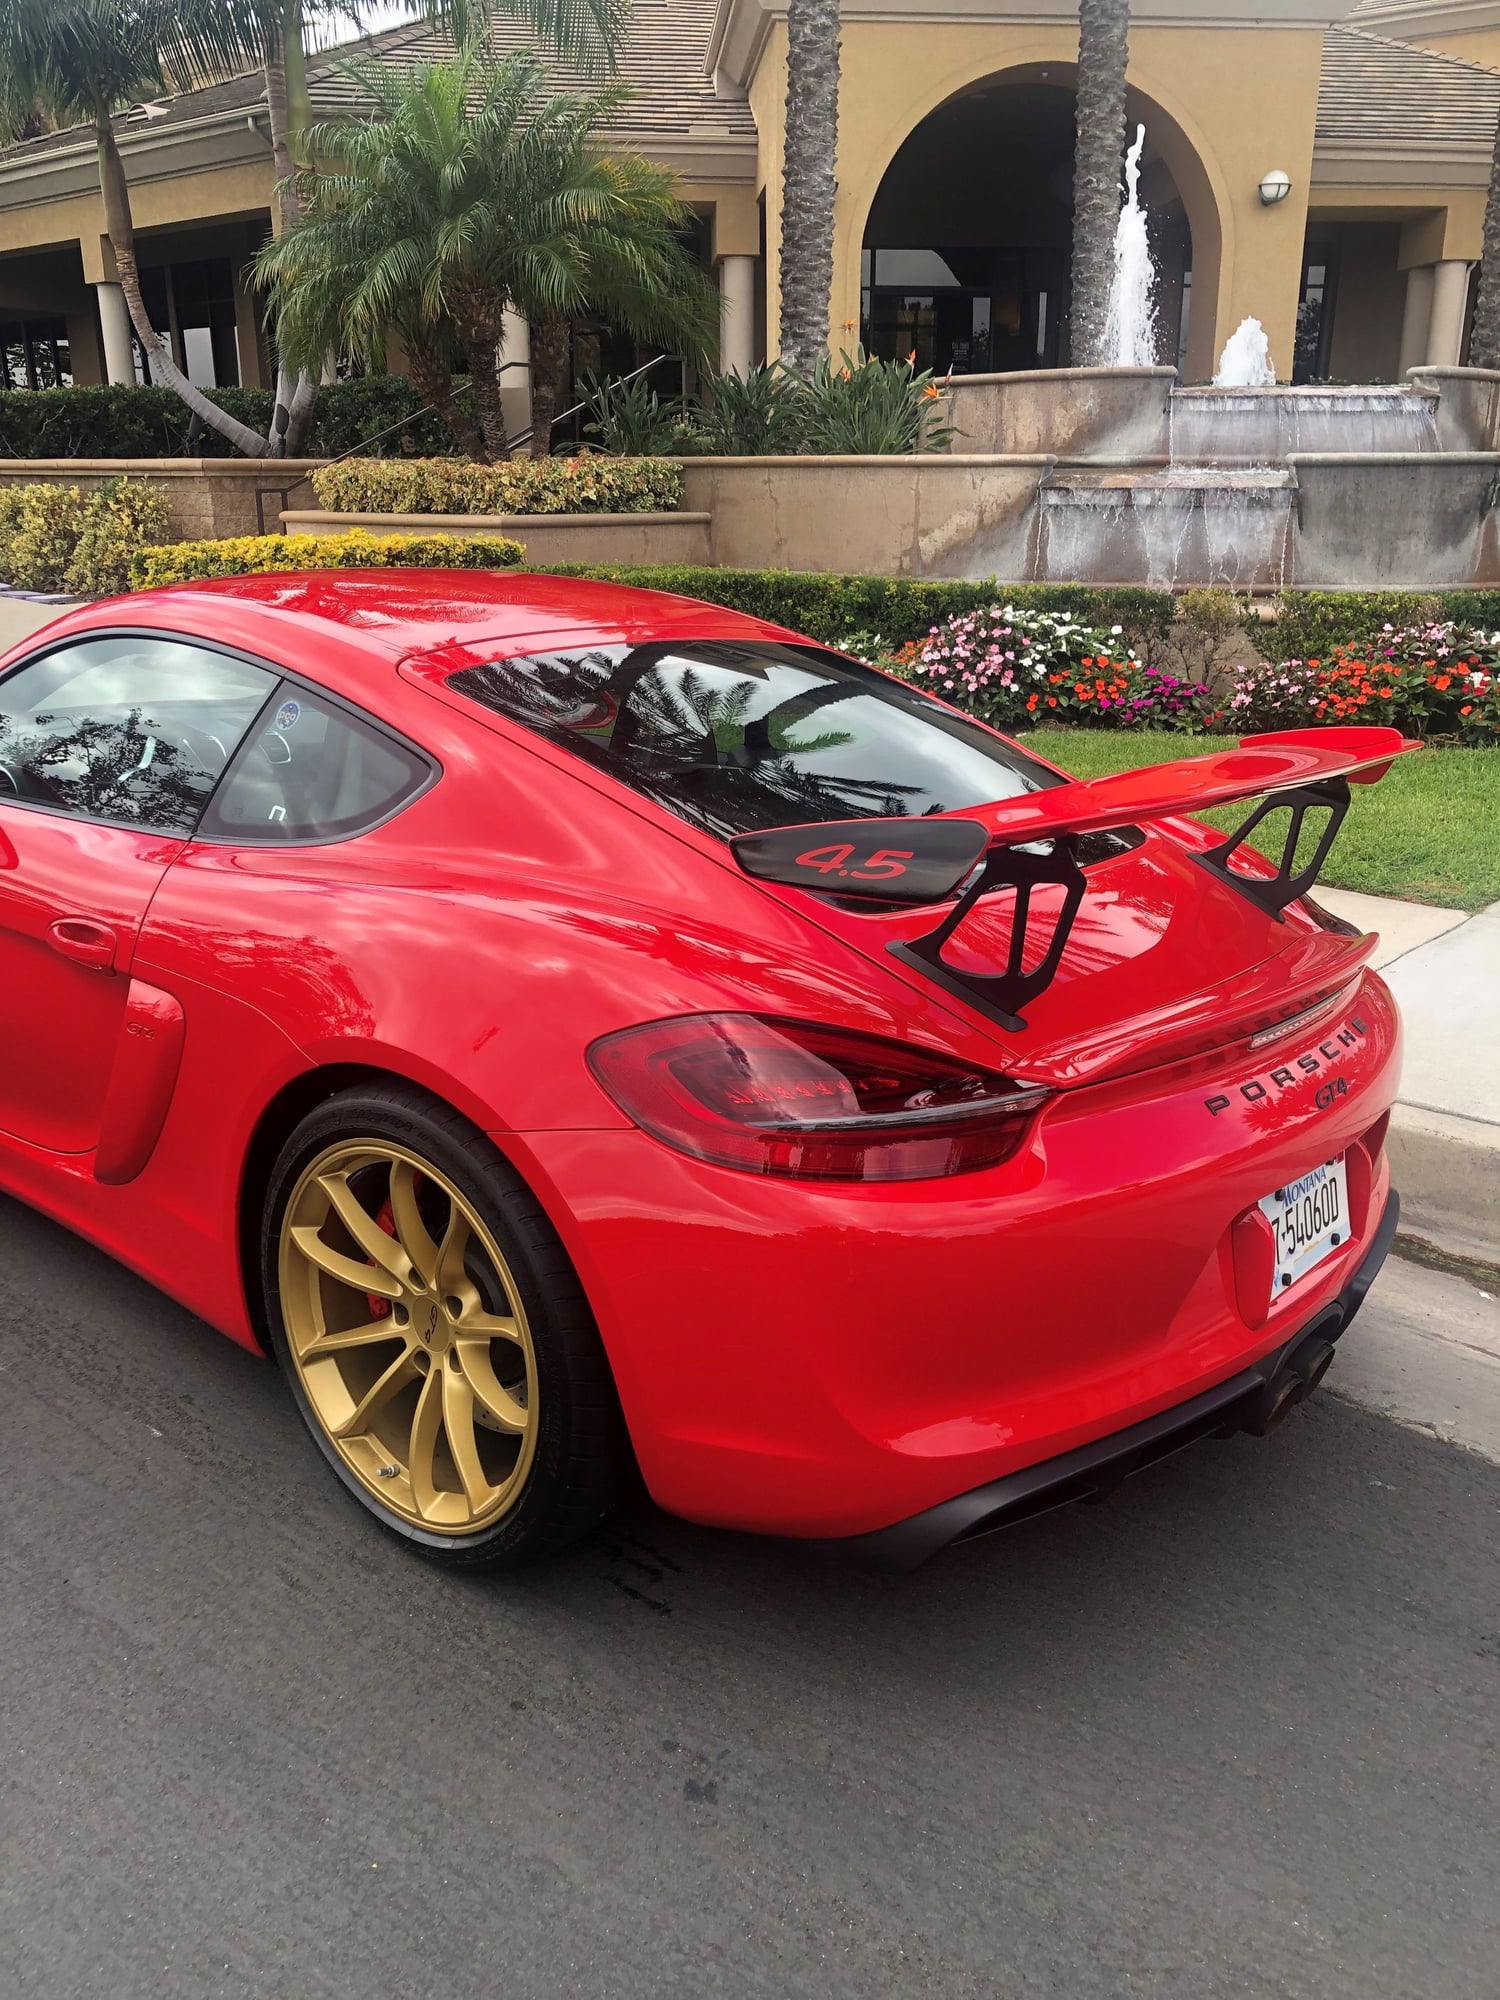 2016 Porsche Cayman GT4 - 2016 Porsche GT4 with DeMan Motorsports 4.5L conversion, ready today - avoid the wait - Used - VIN wp0ac2a8xgk197463 - 14,400 Miles - Coupe - Red - Laguna Niguel, CA 92677, United States